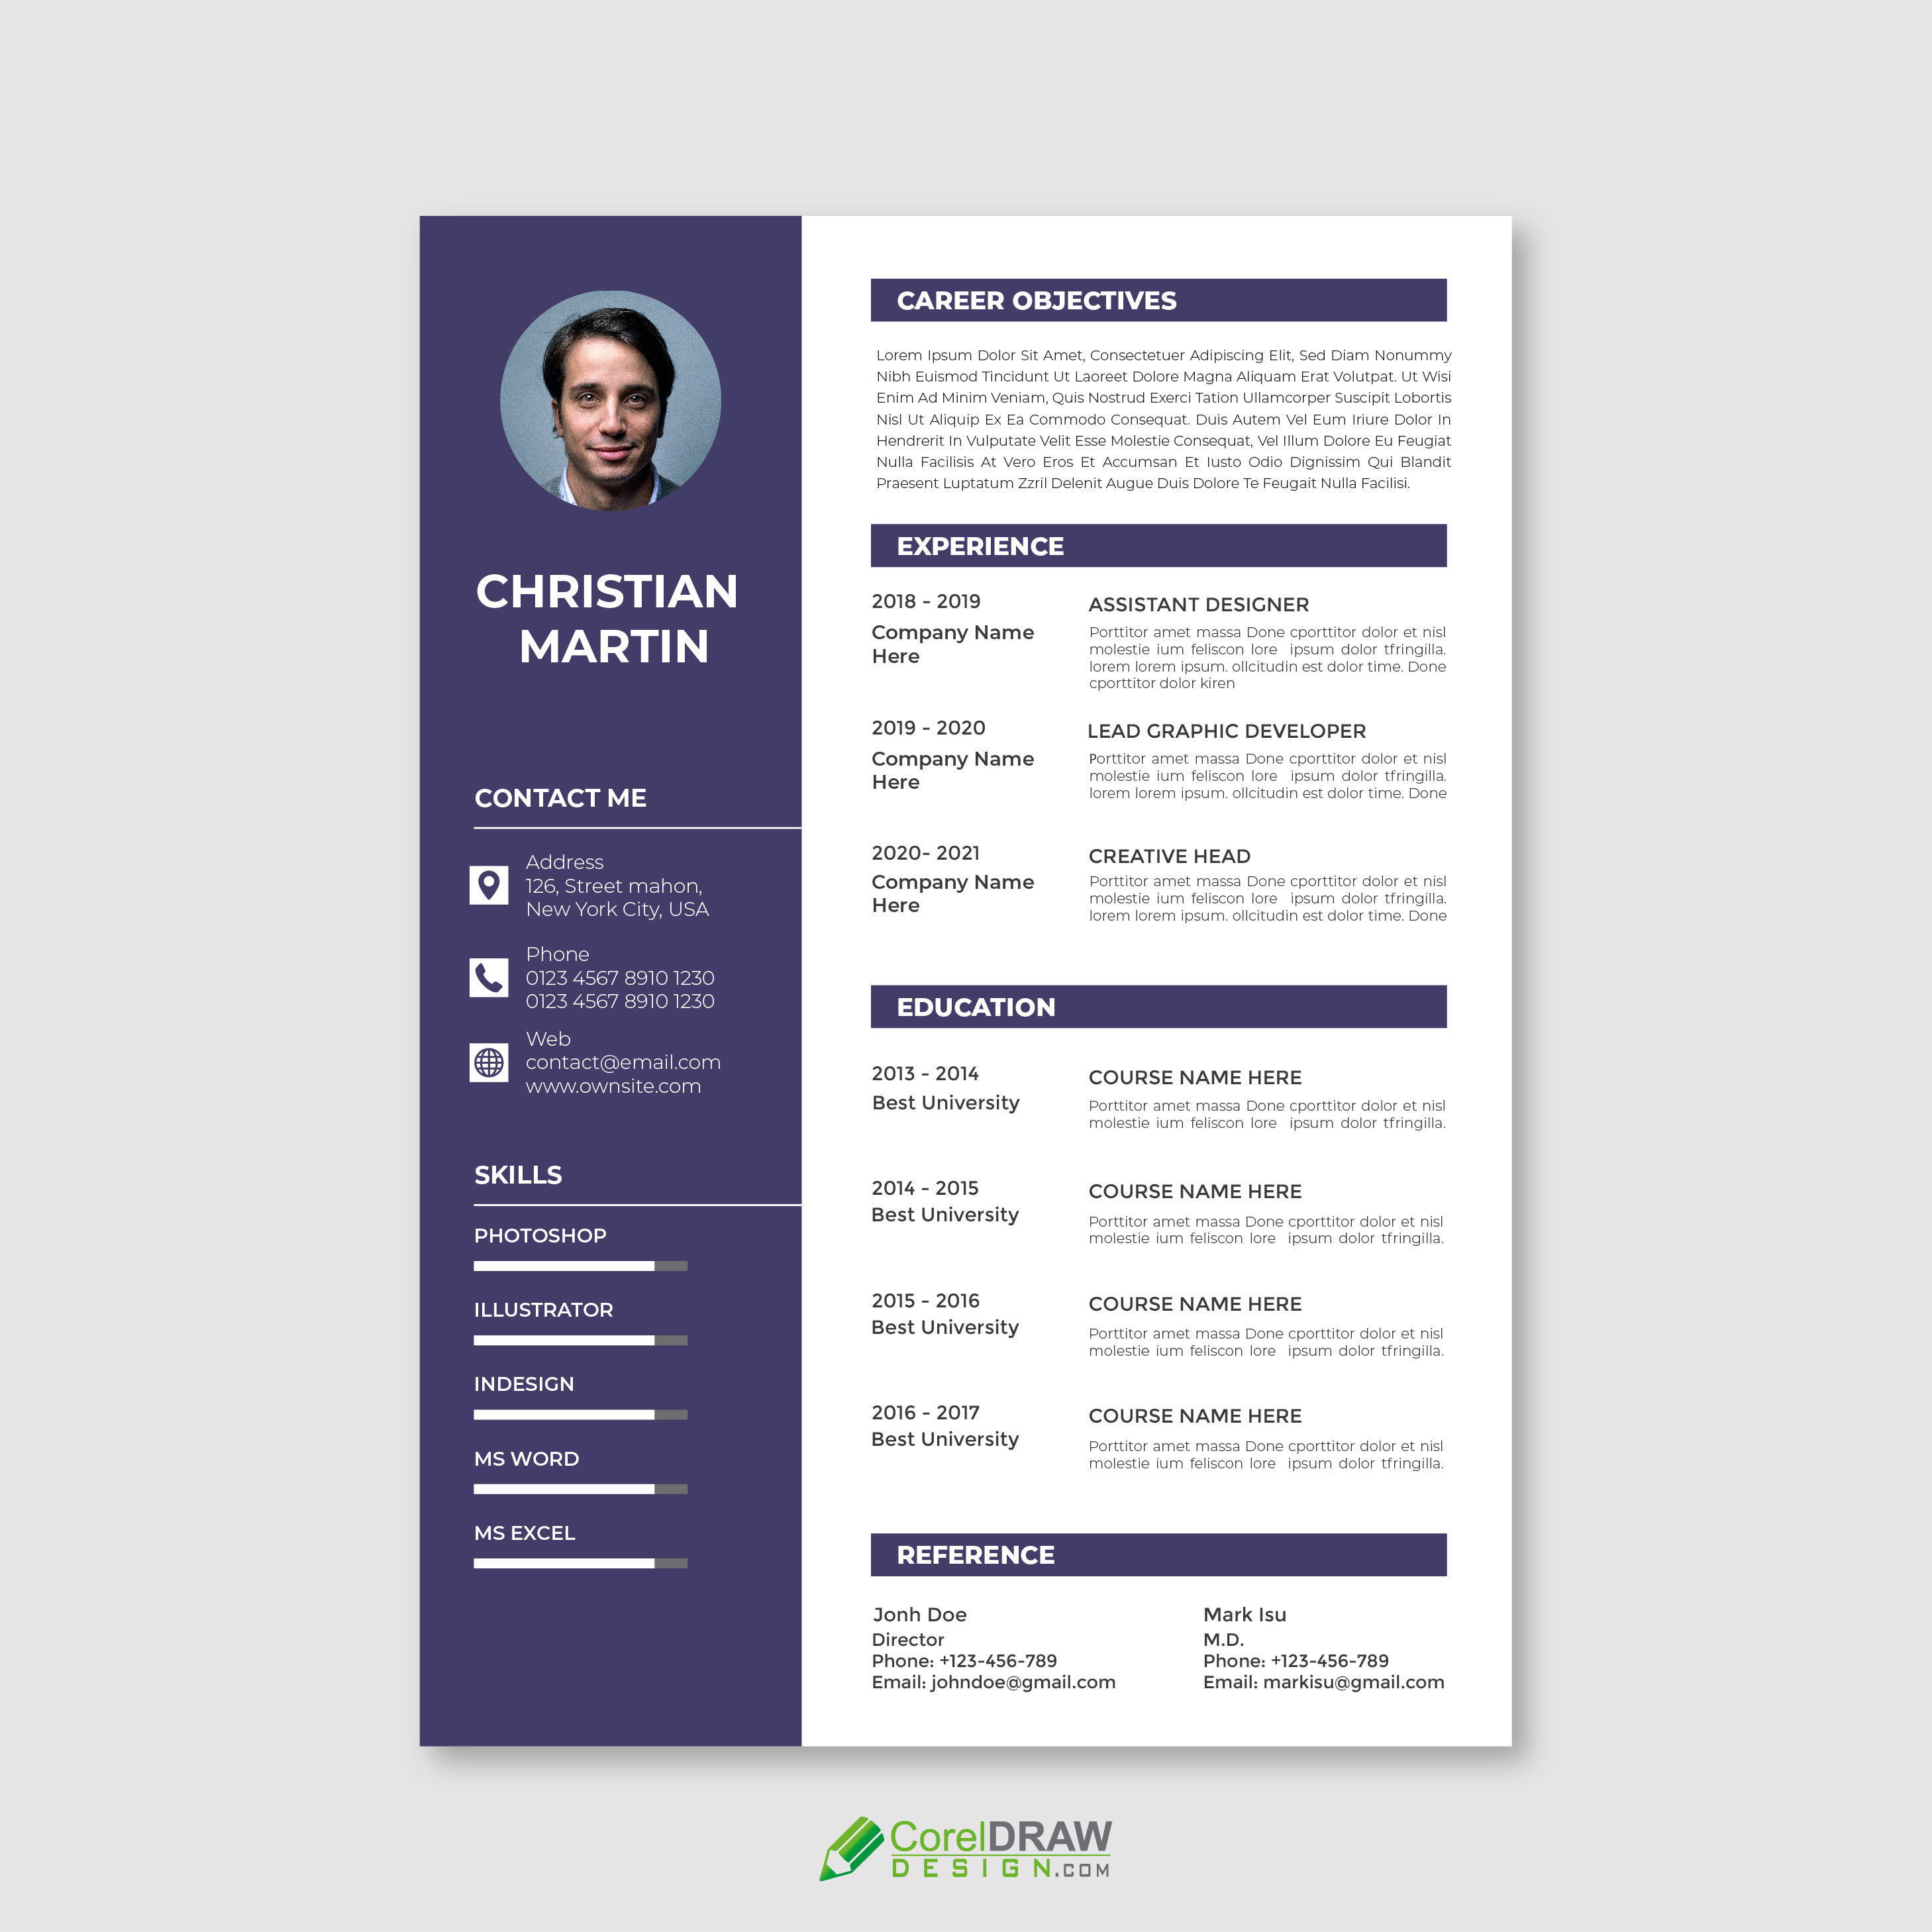 Abstract Corporate Cv curriculum vitae Vector Template